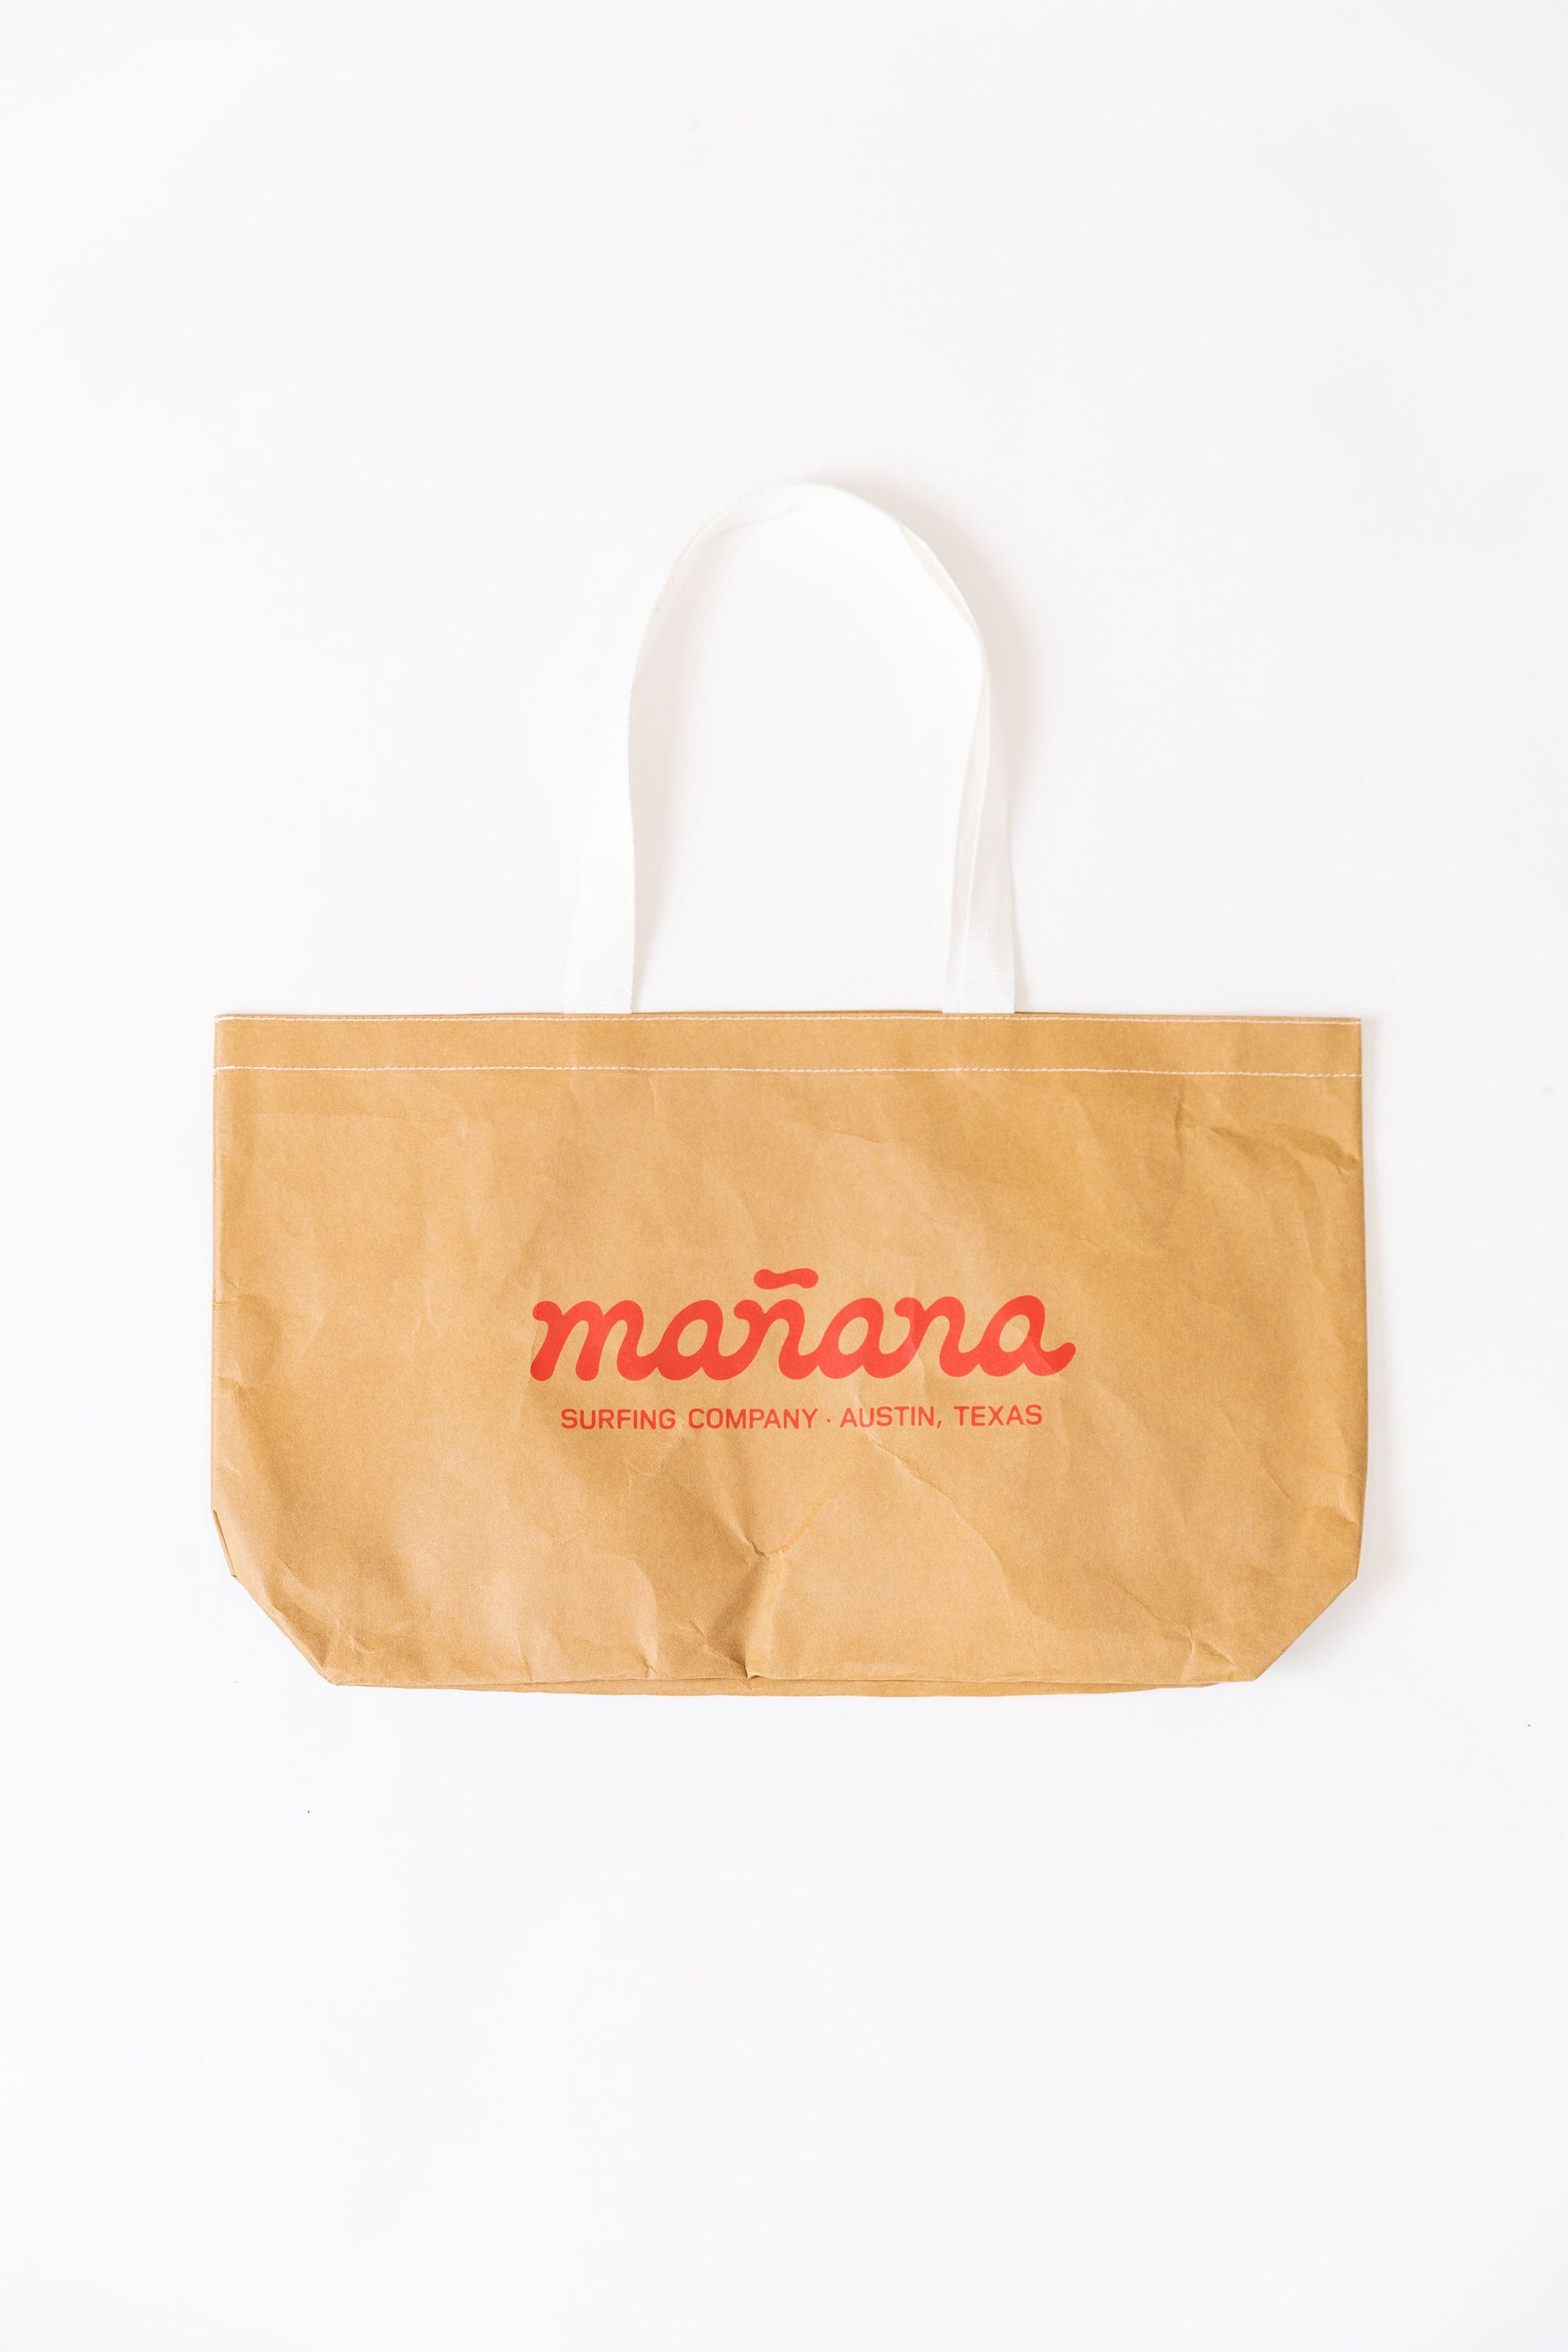 A picture of Beach Tote with Manana branding